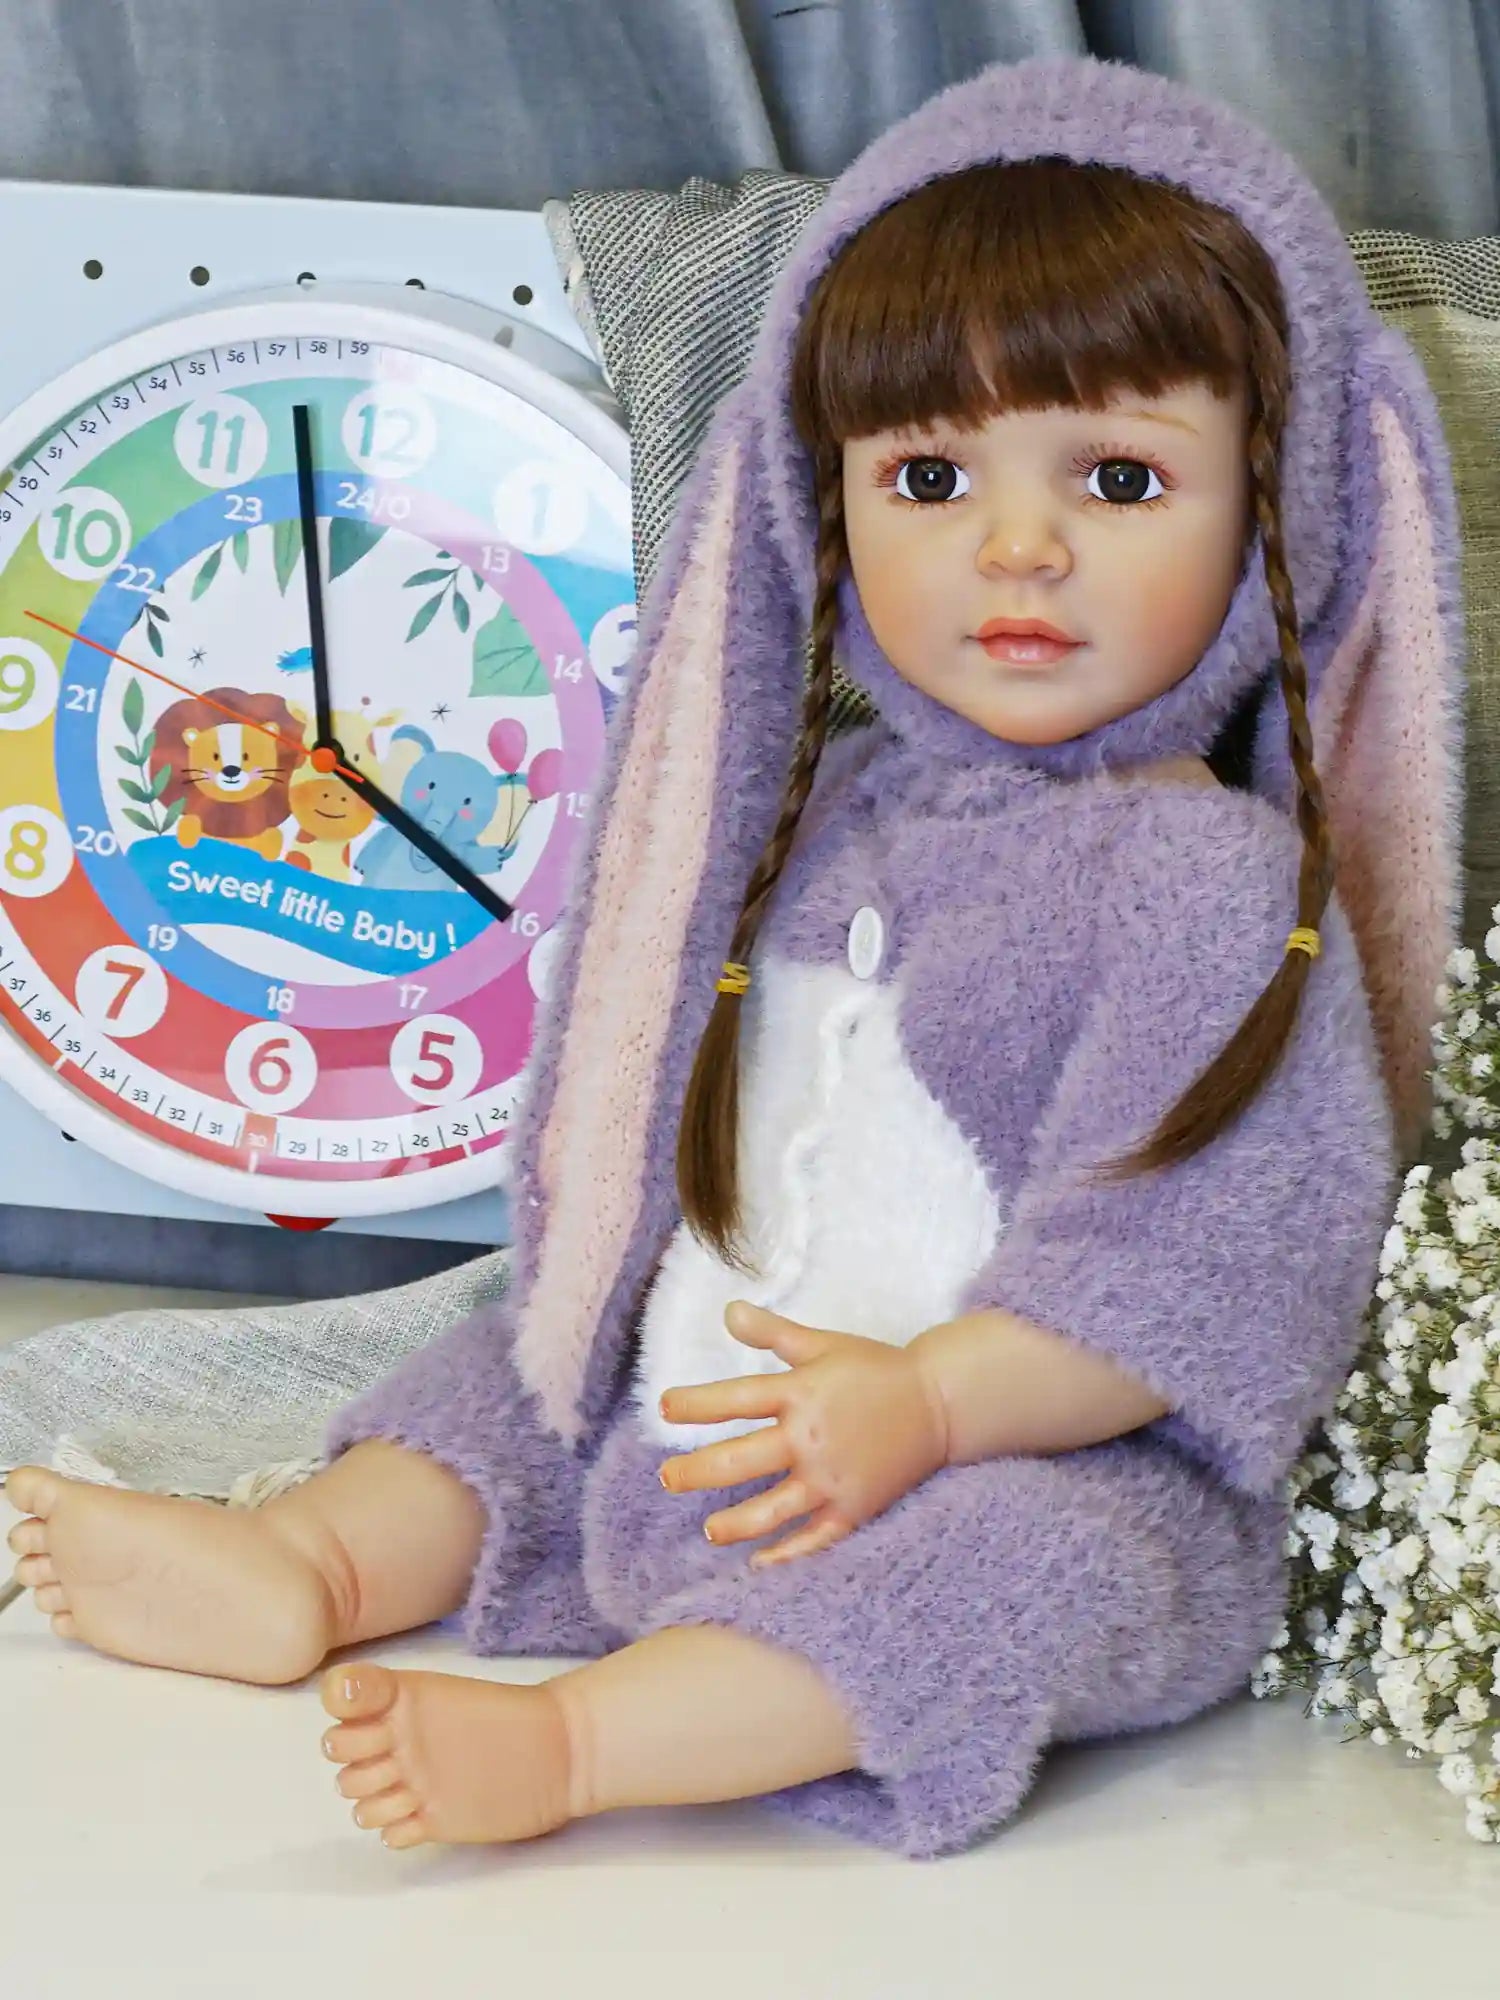 Lifelike reborn doll with brown pigtail braids, capturing a childlike innocence with deep brown eyes, donned in a cozy purple and white bunny outfit.